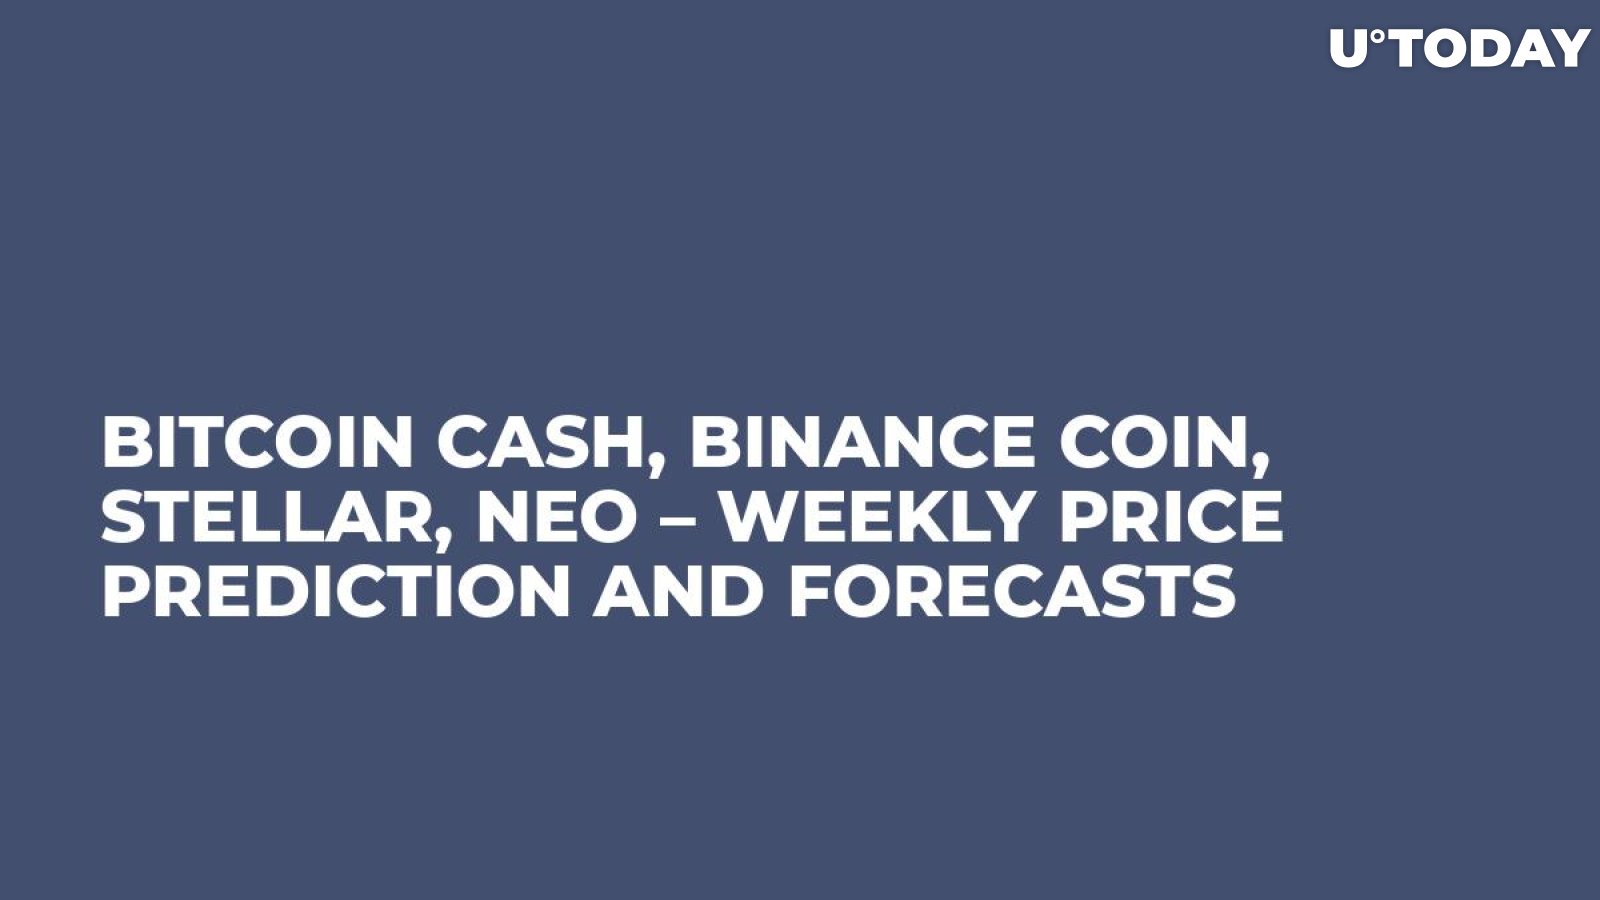 Bitcoin Cash, Binance Coin, Stellar, NEO – Weekly Price Prediction and Forecasts